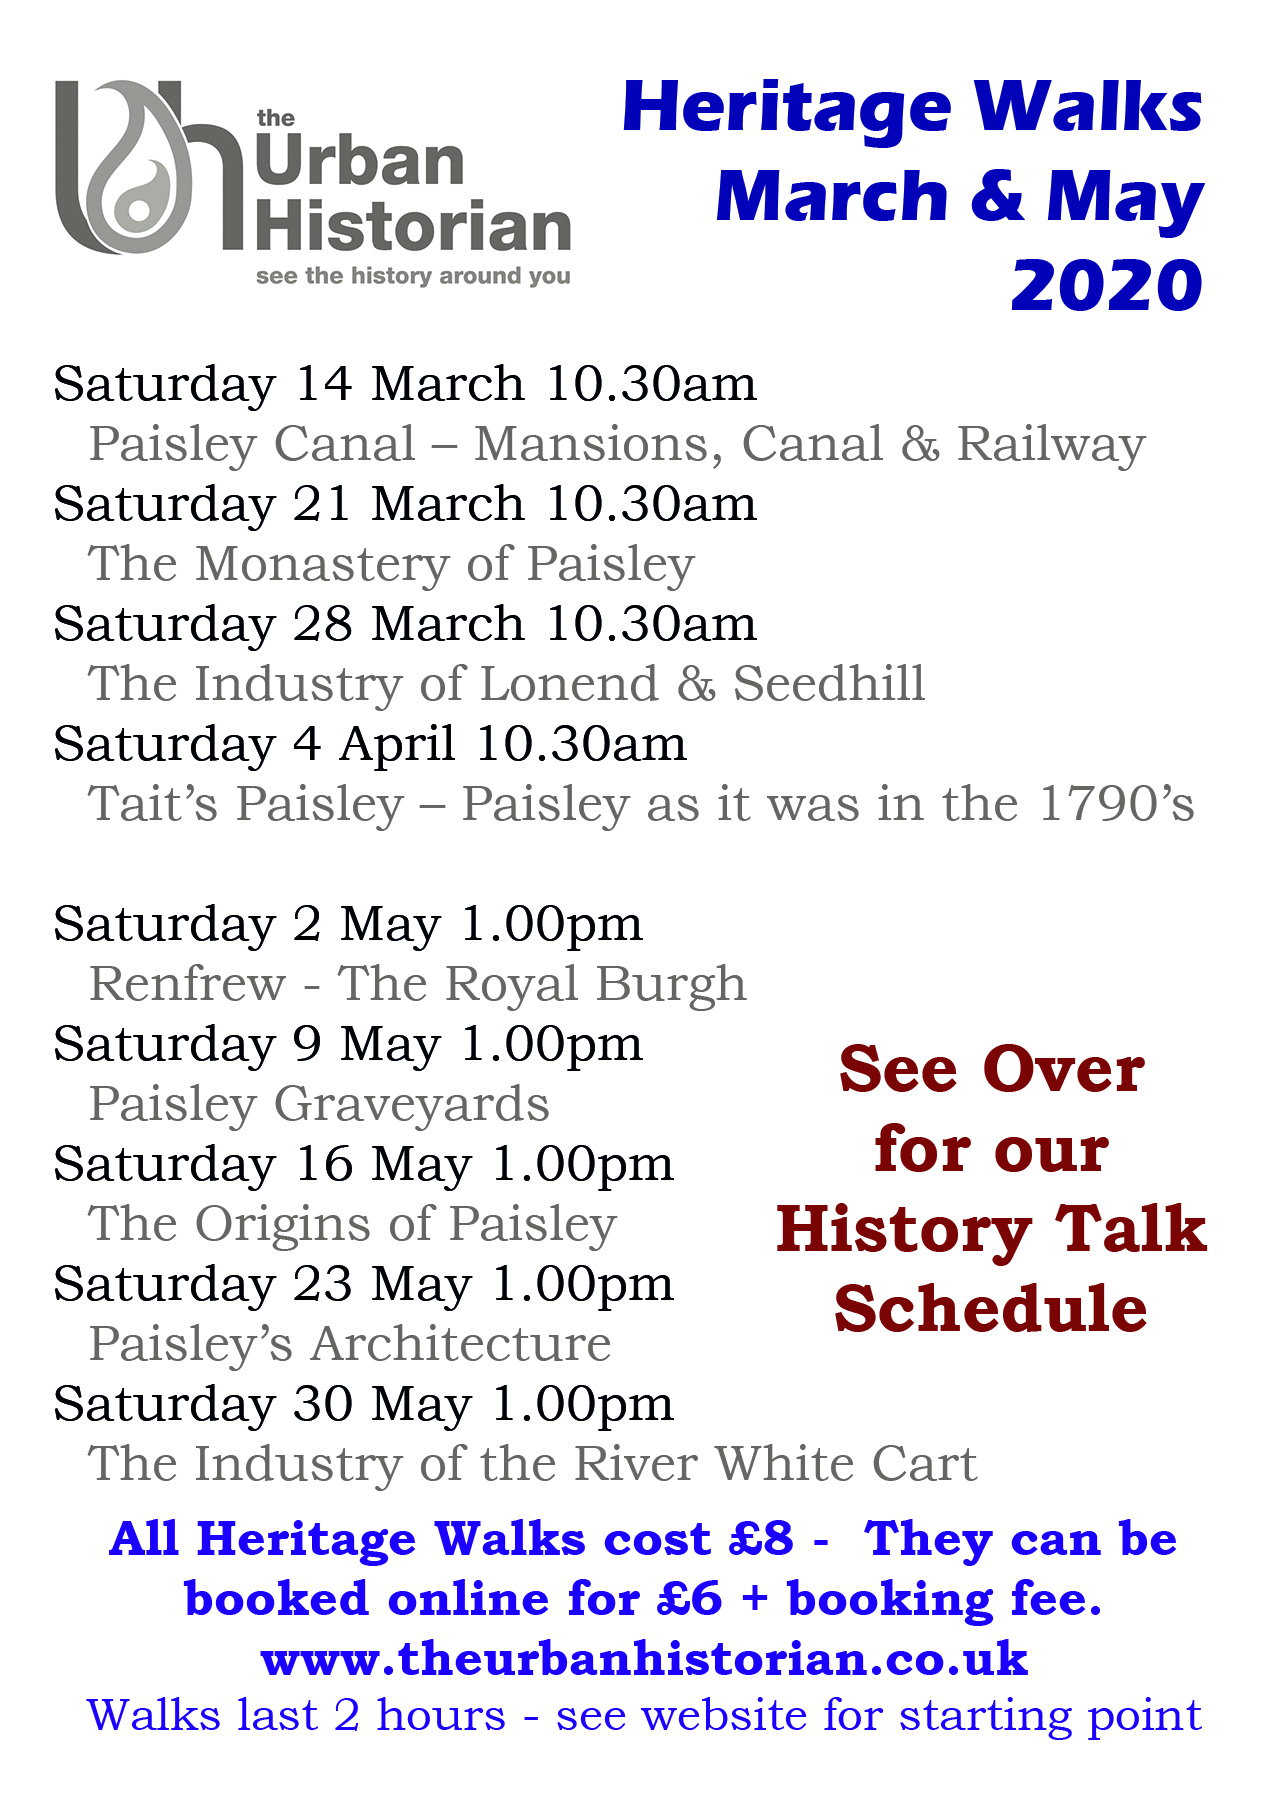 Heritage Walk details March to May 2020